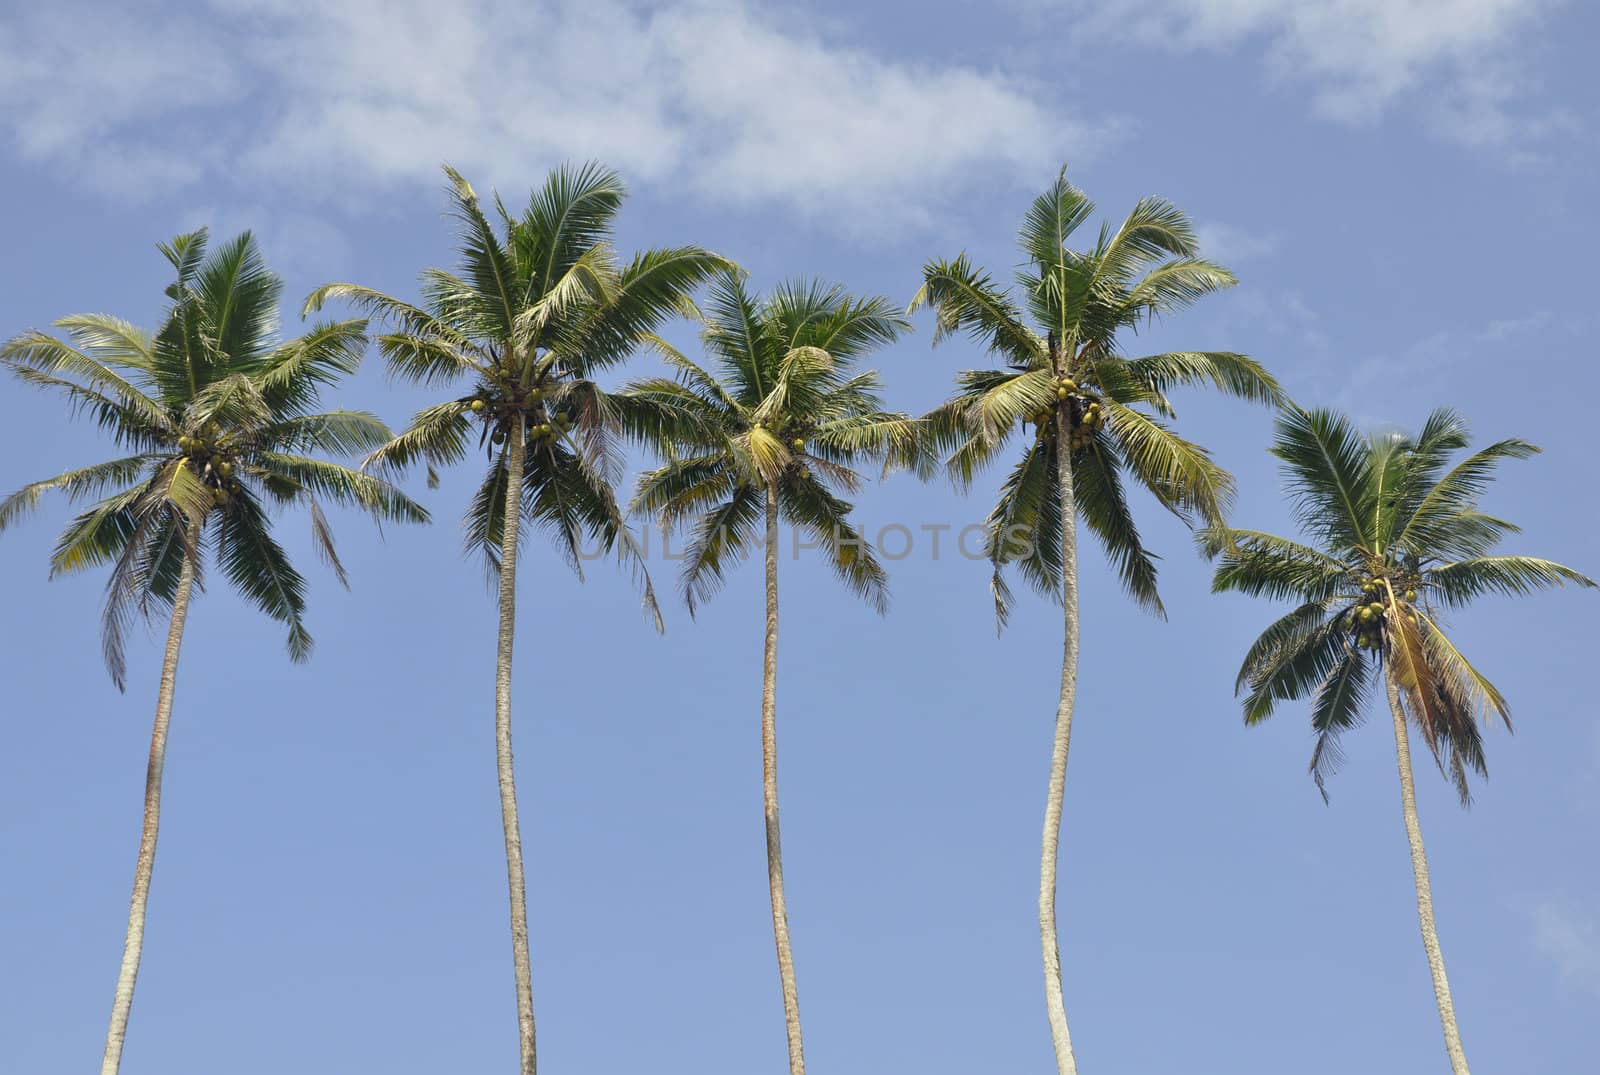 Palm trees against a beautiful clear sky by kdreams02